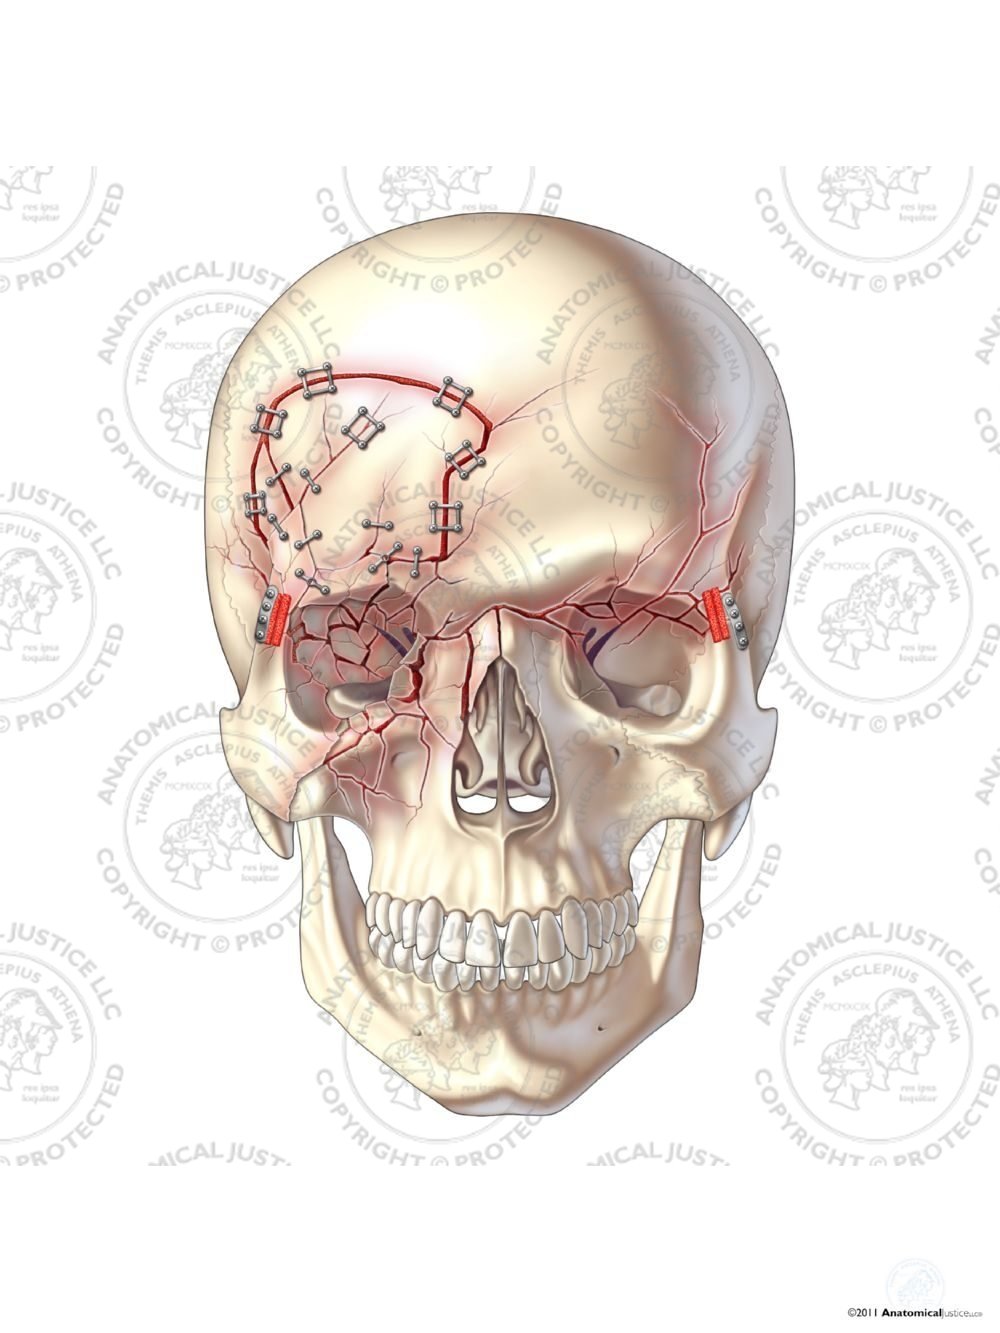 Right Craniotomy and Repair of Skull Fractures – No Text